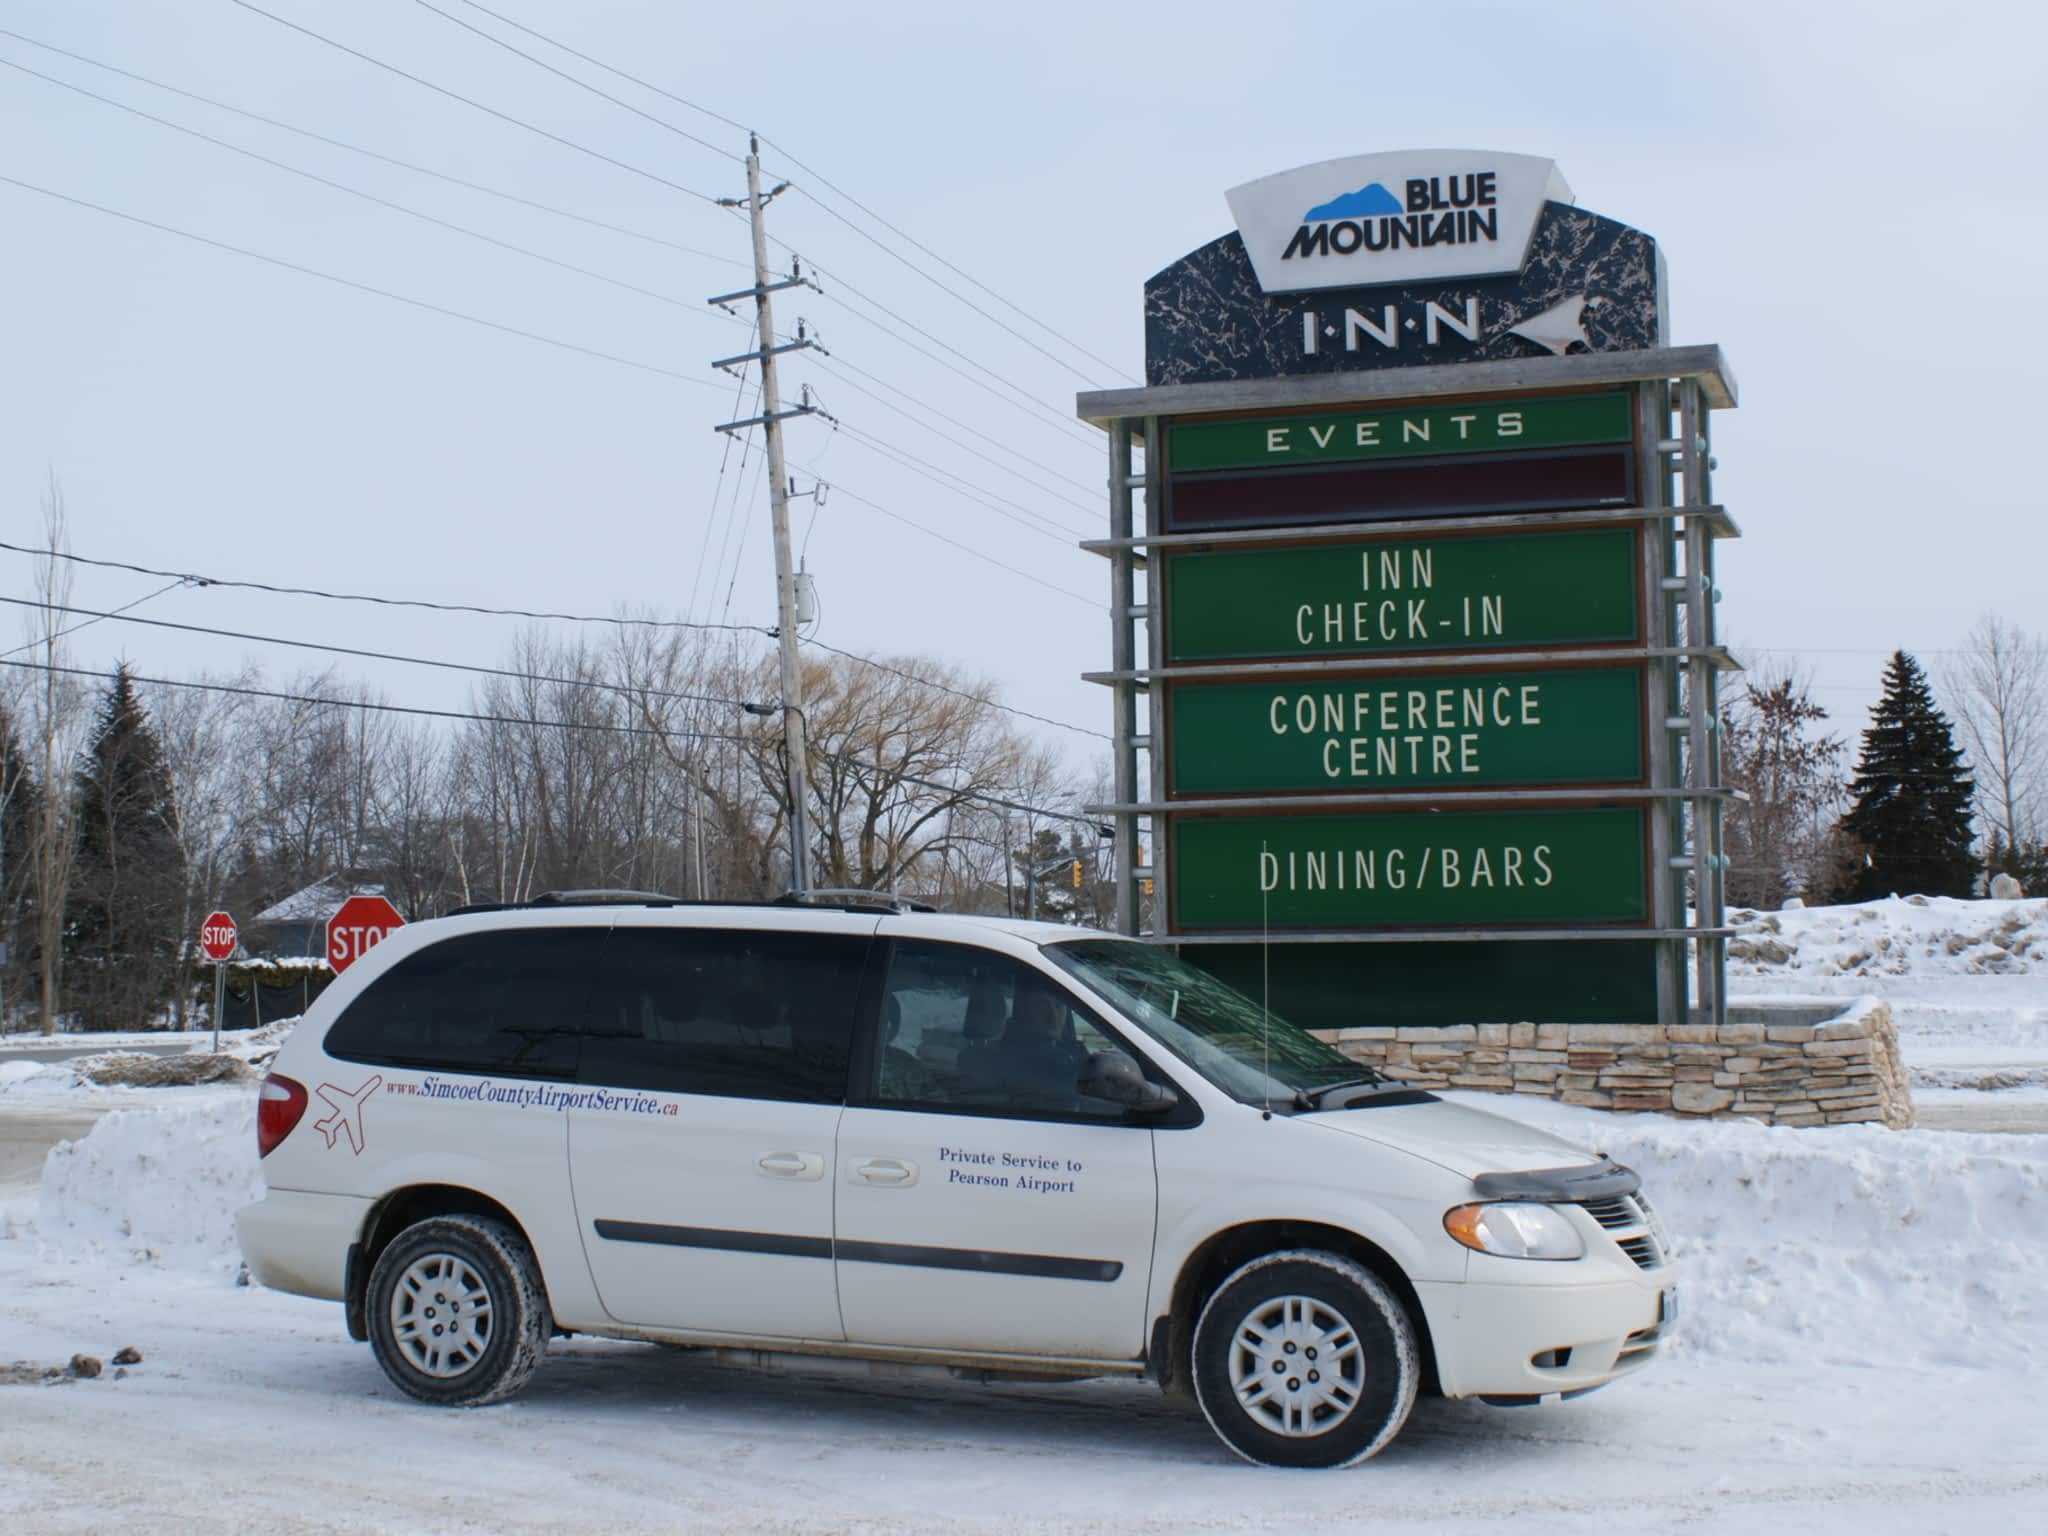 photo Simcoe County Airport Services